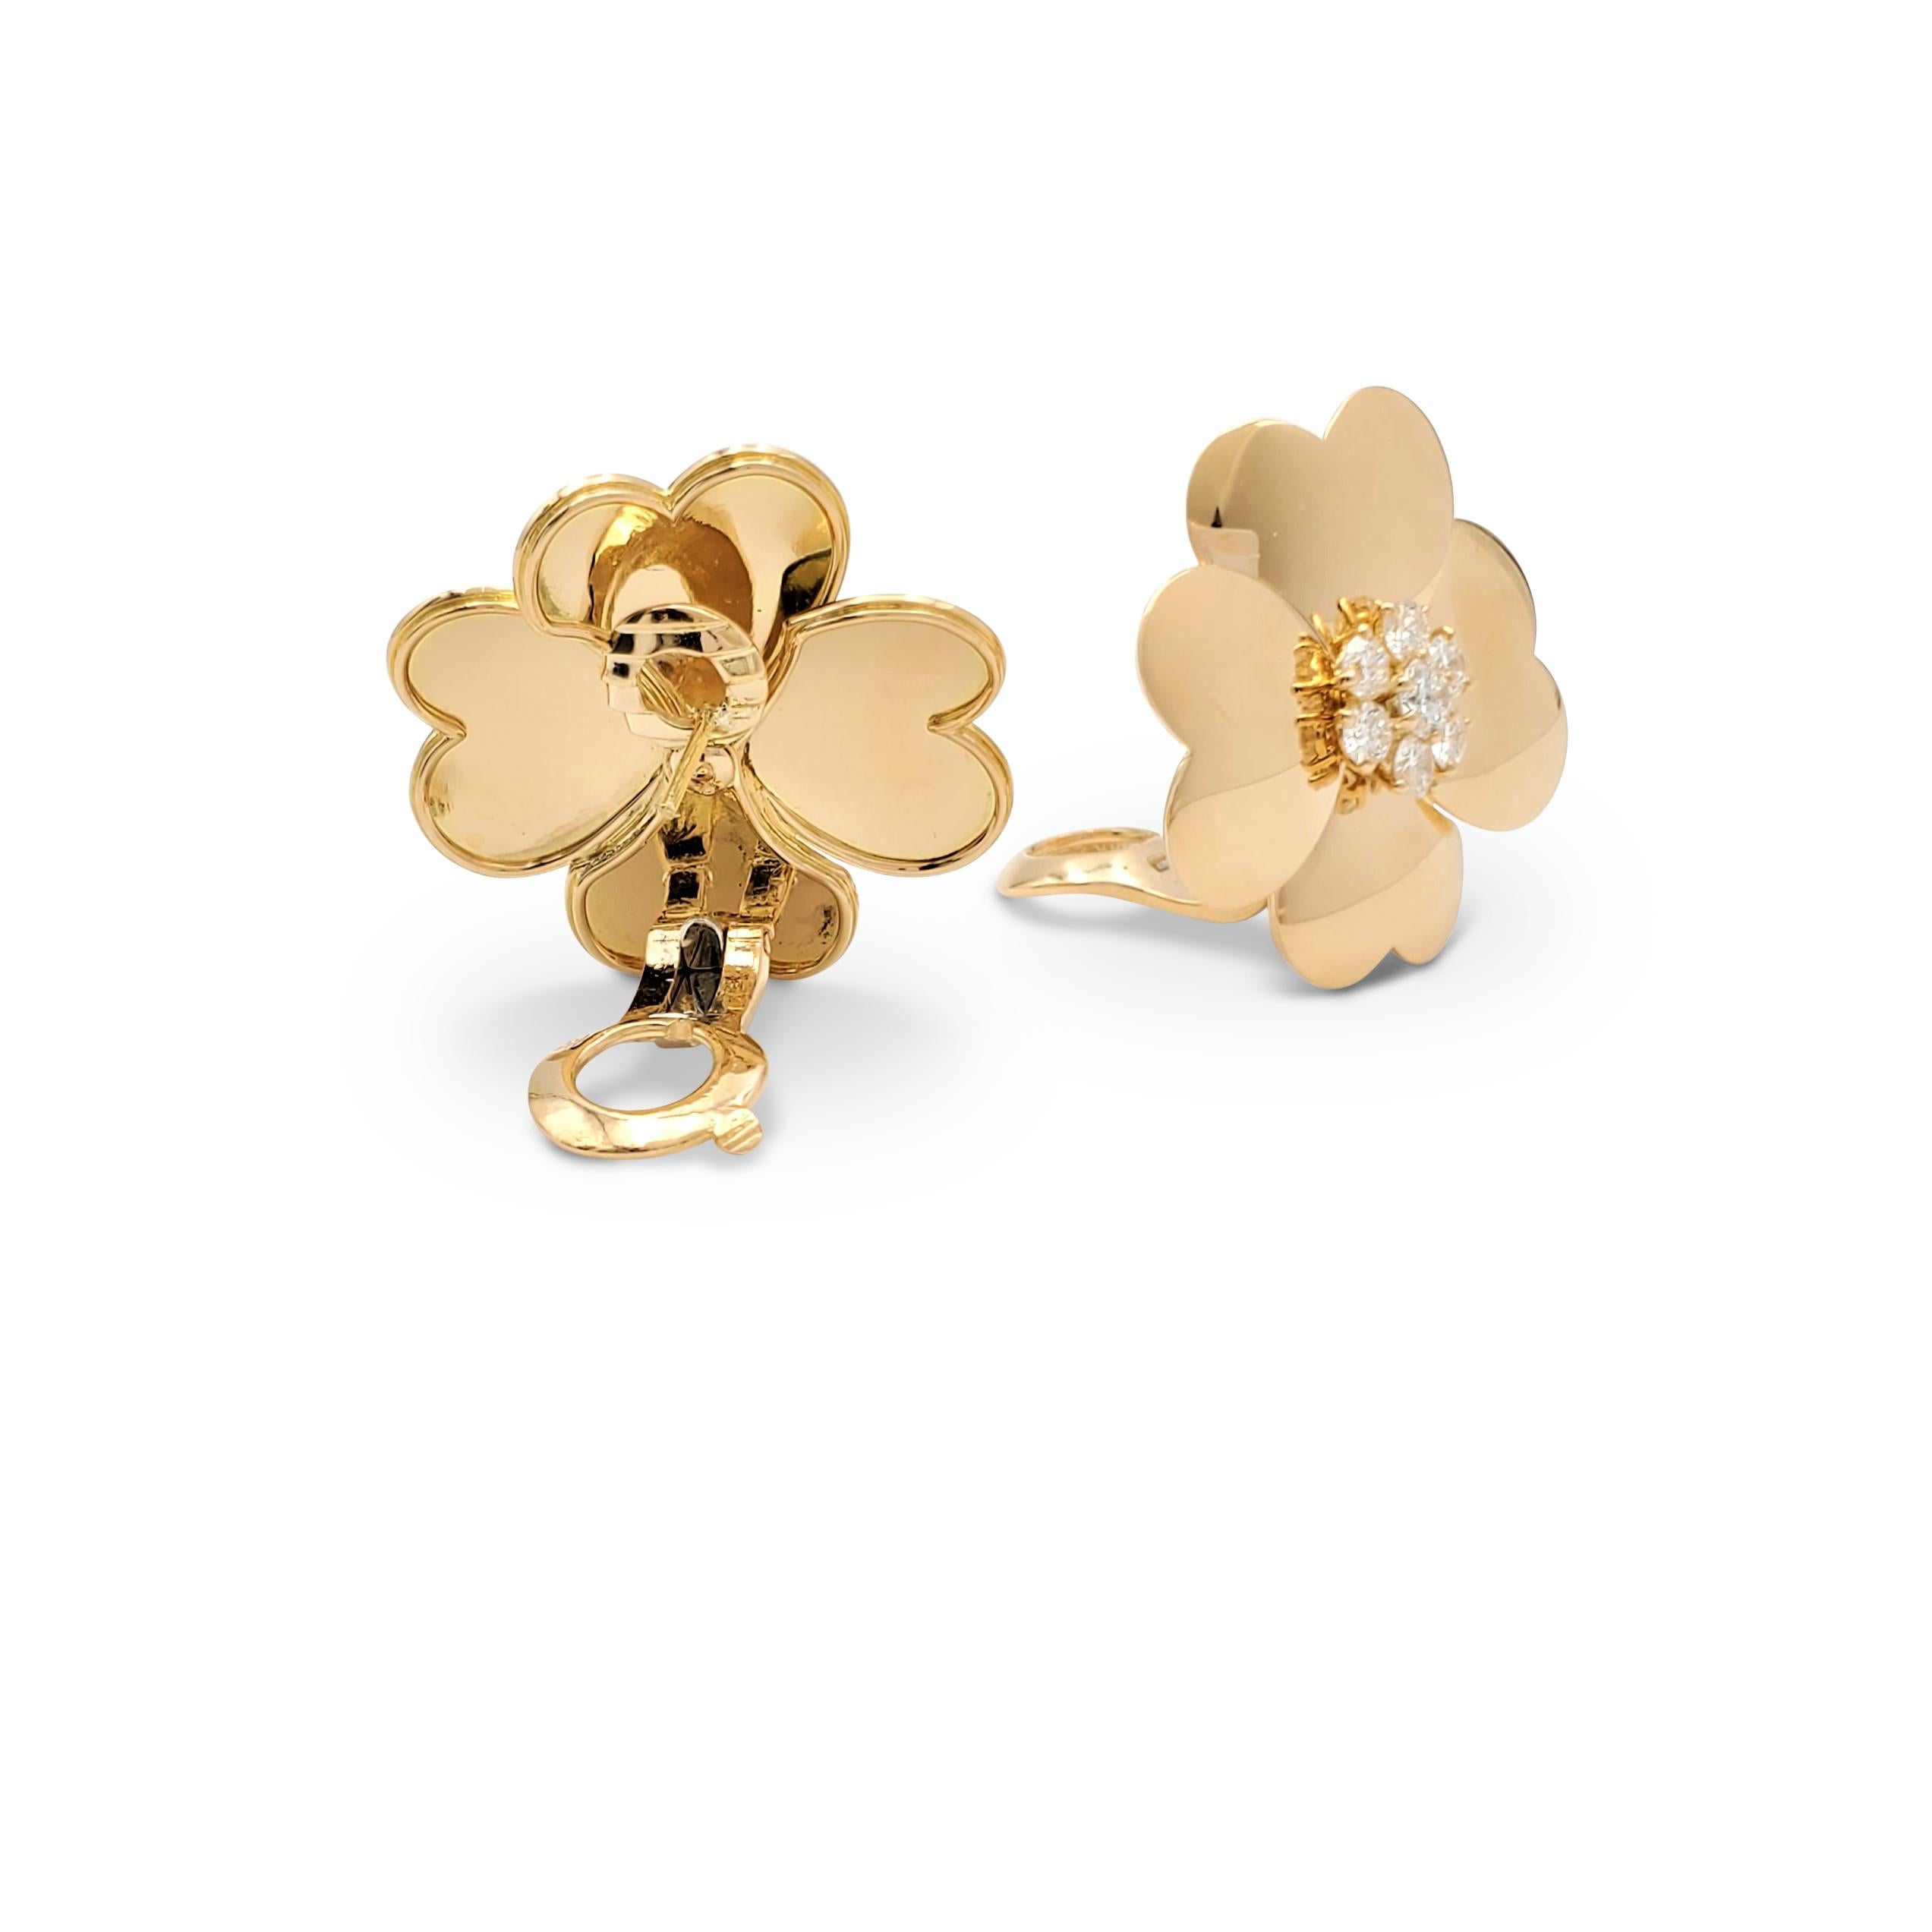 Round Cut Van Cleef & Arpels 'Cosmos' Yellow Gold and Diamond Earrings